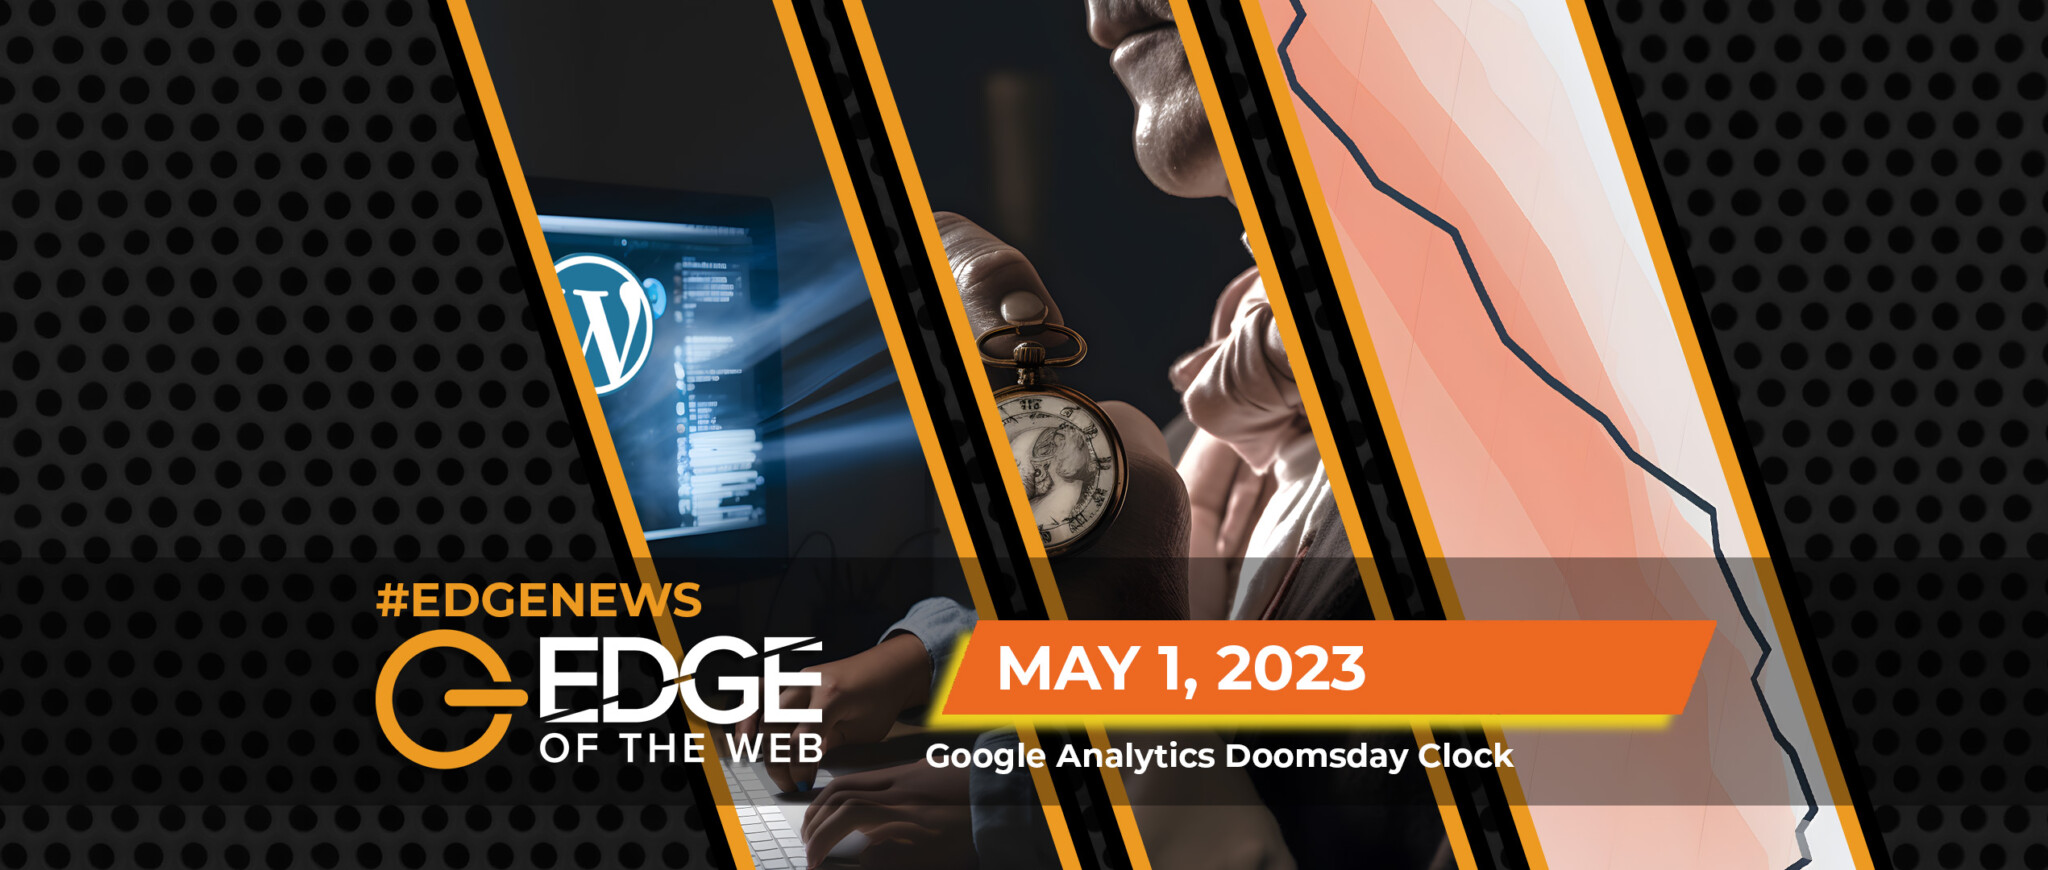 590 | News from the EDGE | Week of 5.1.2023